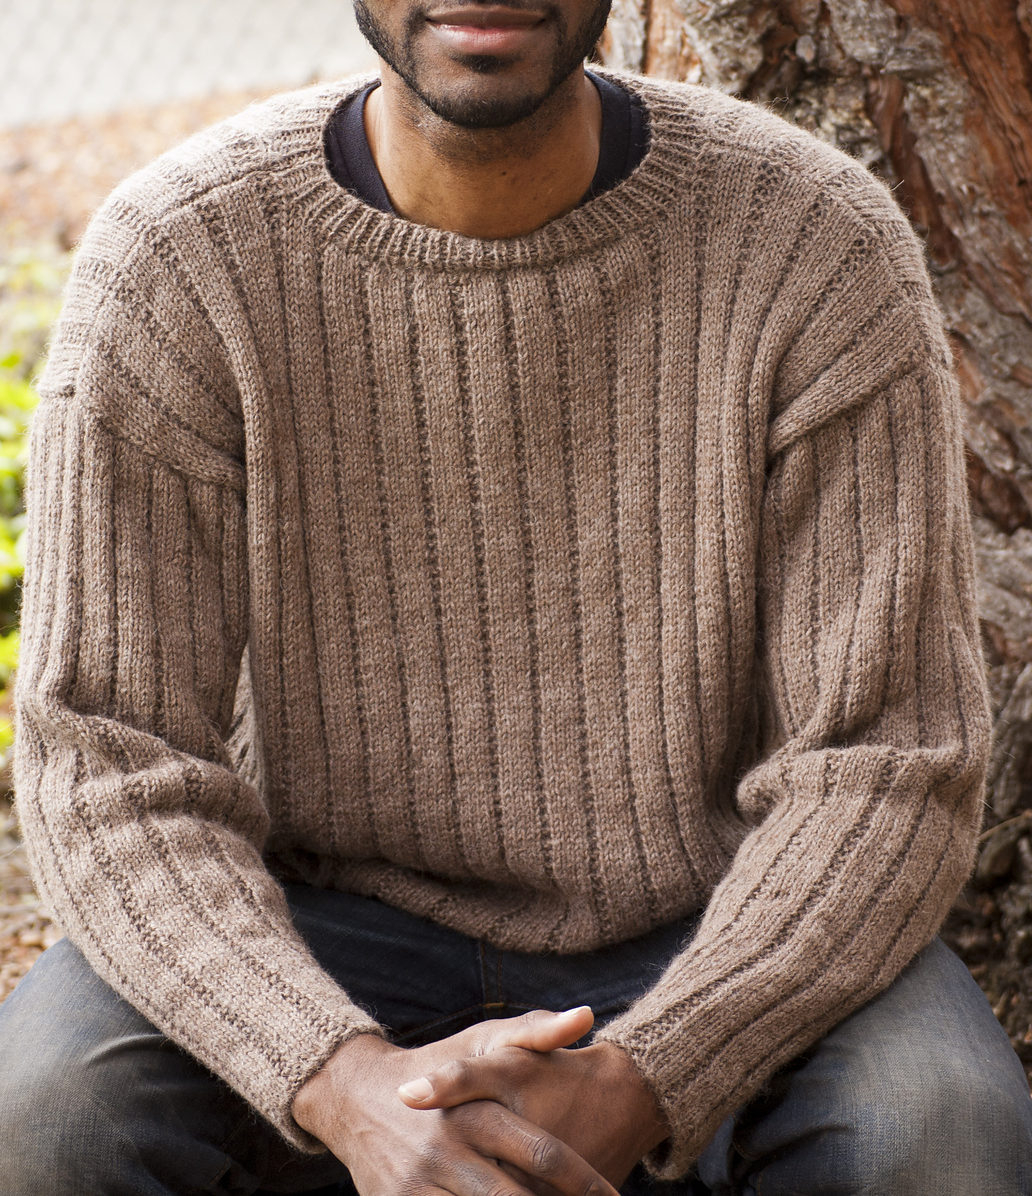 Mens Knitting Patterns Free Knitting Patterns For Mens Cardigan Sweaters